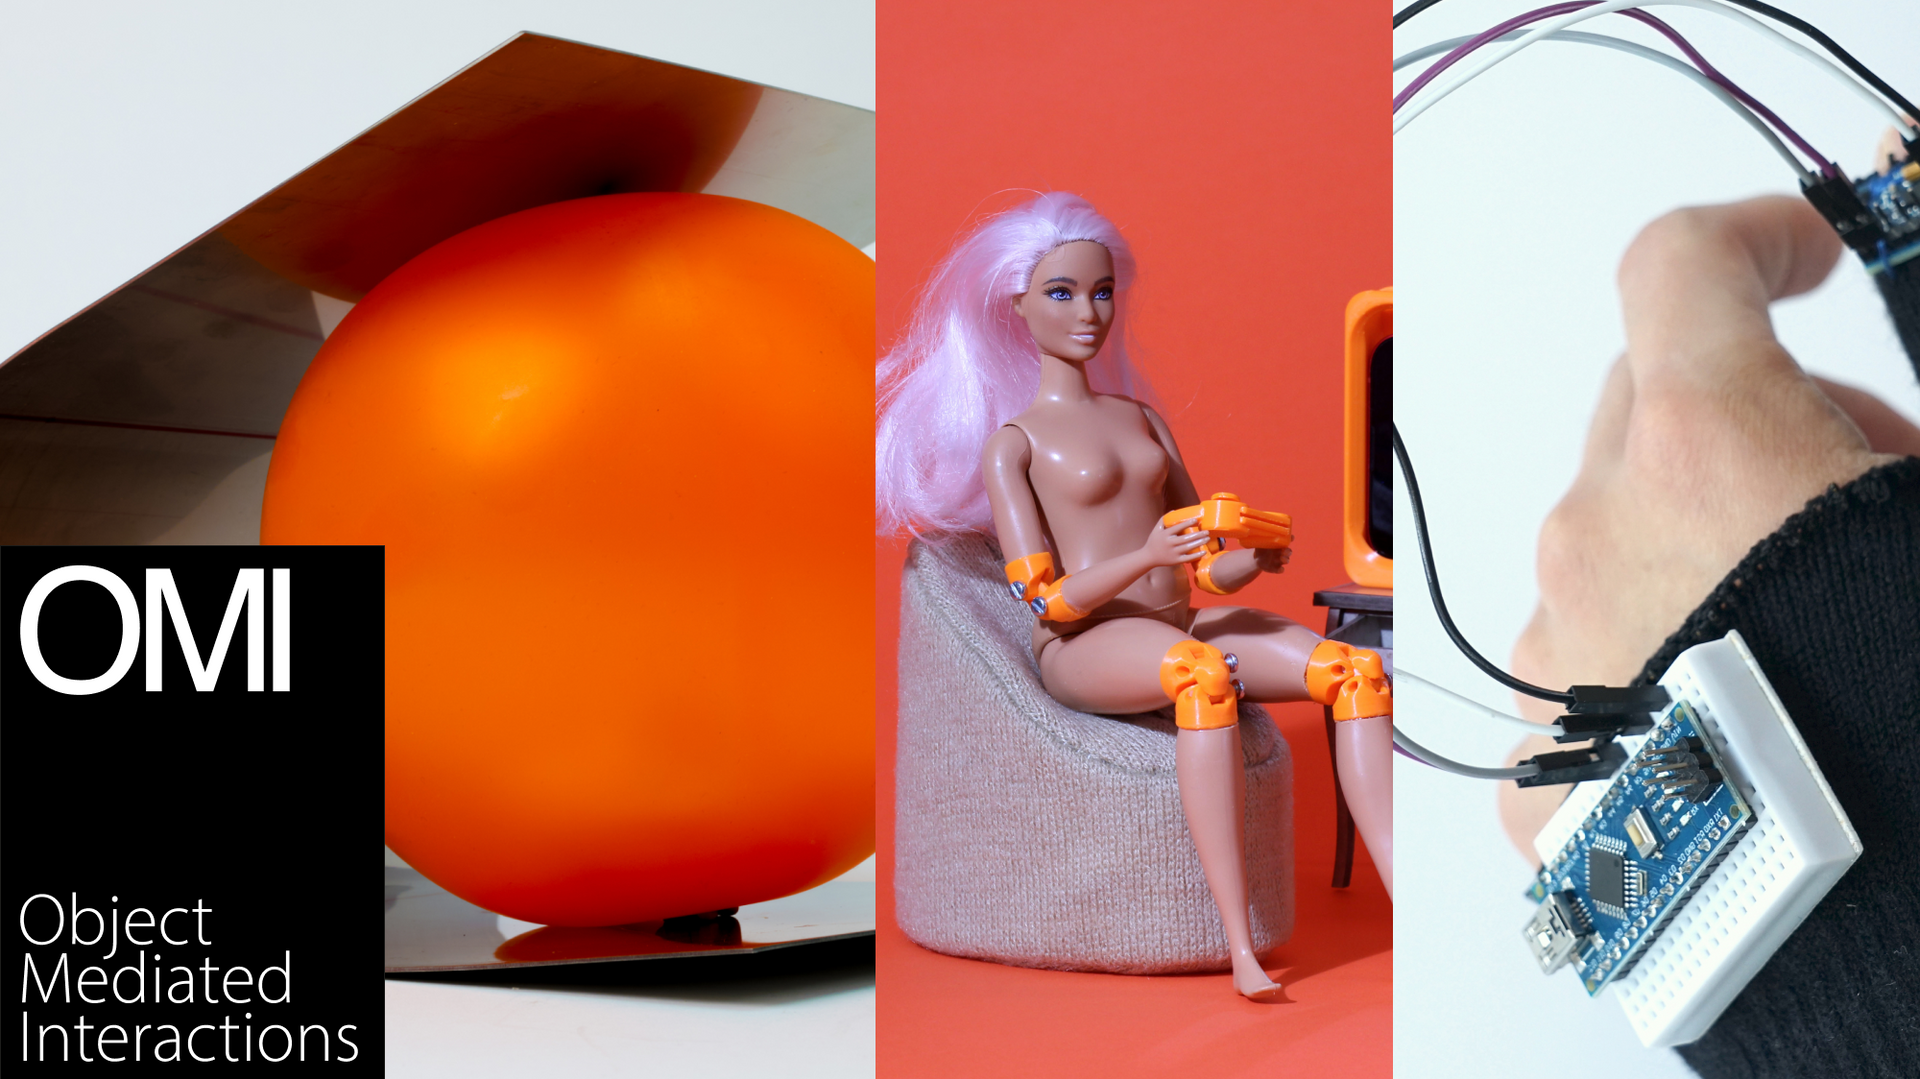 Three images side by side: one orange ball, one Barbie doll playing video games, one microscopic circuitboard on a jumper cuff, 'OMI Object Mediated Interactions' in black textbox on left